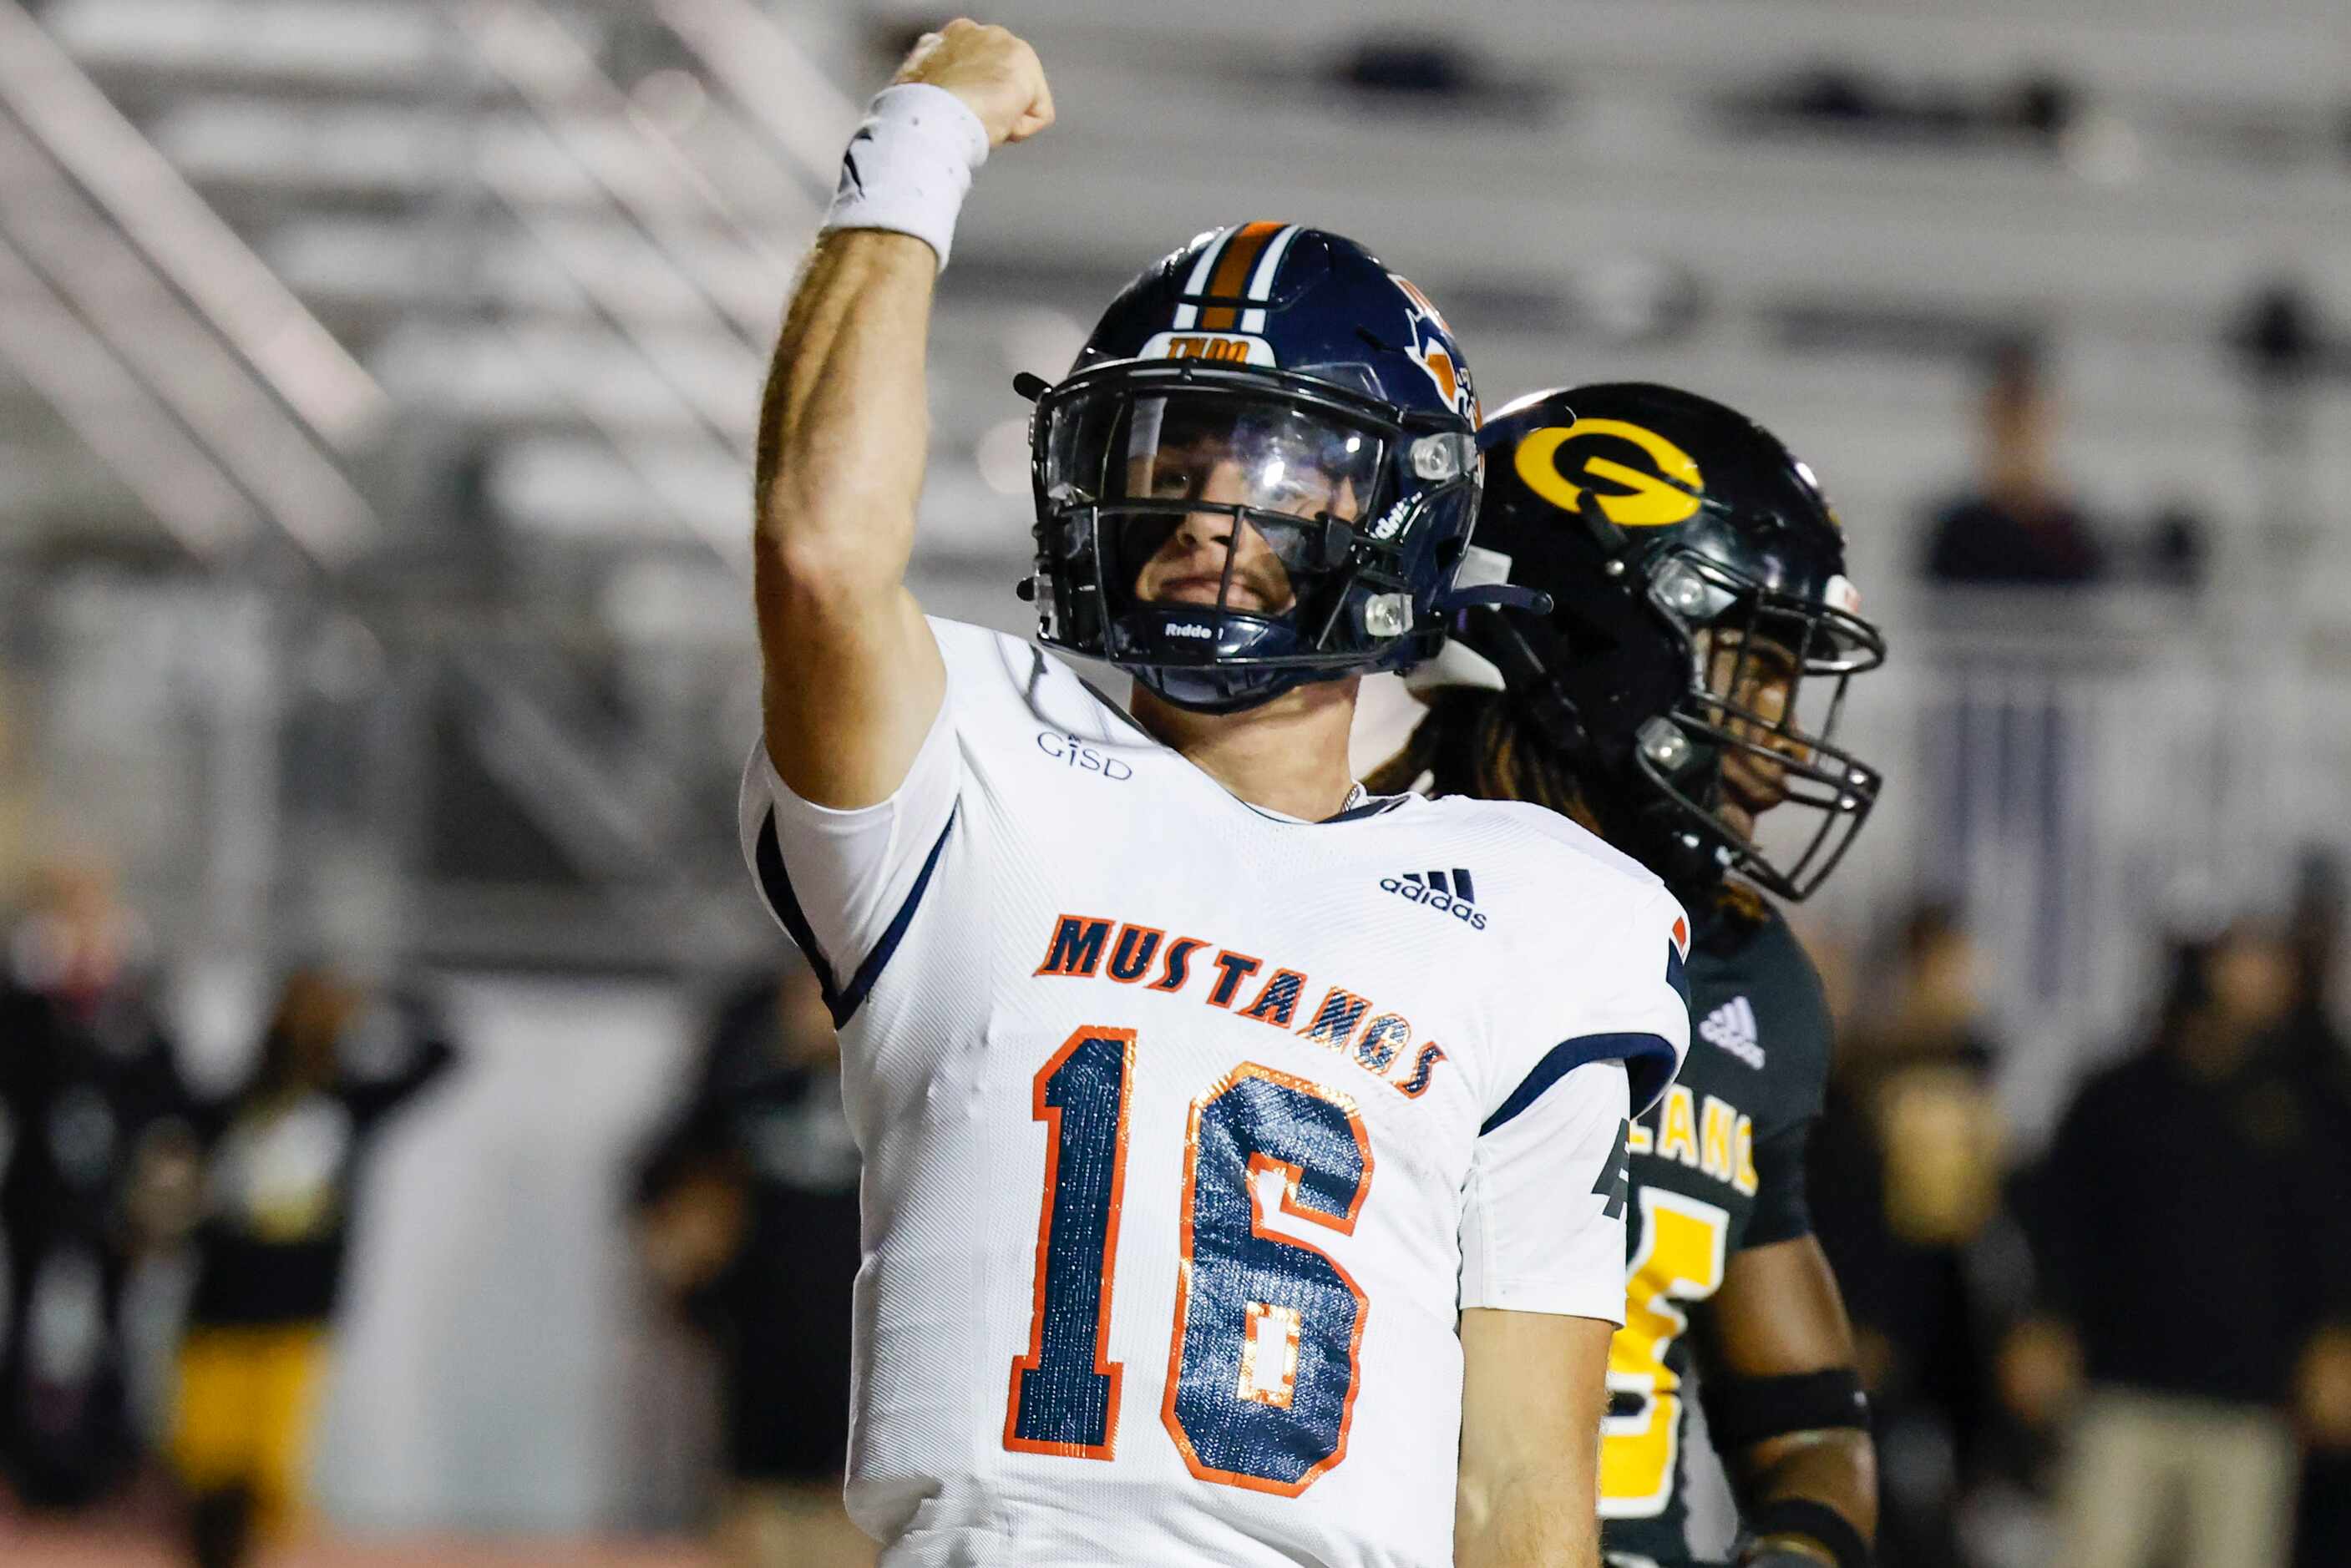 Sachse High School QB Brenden George celebrates after a touchdown during the first half of a...